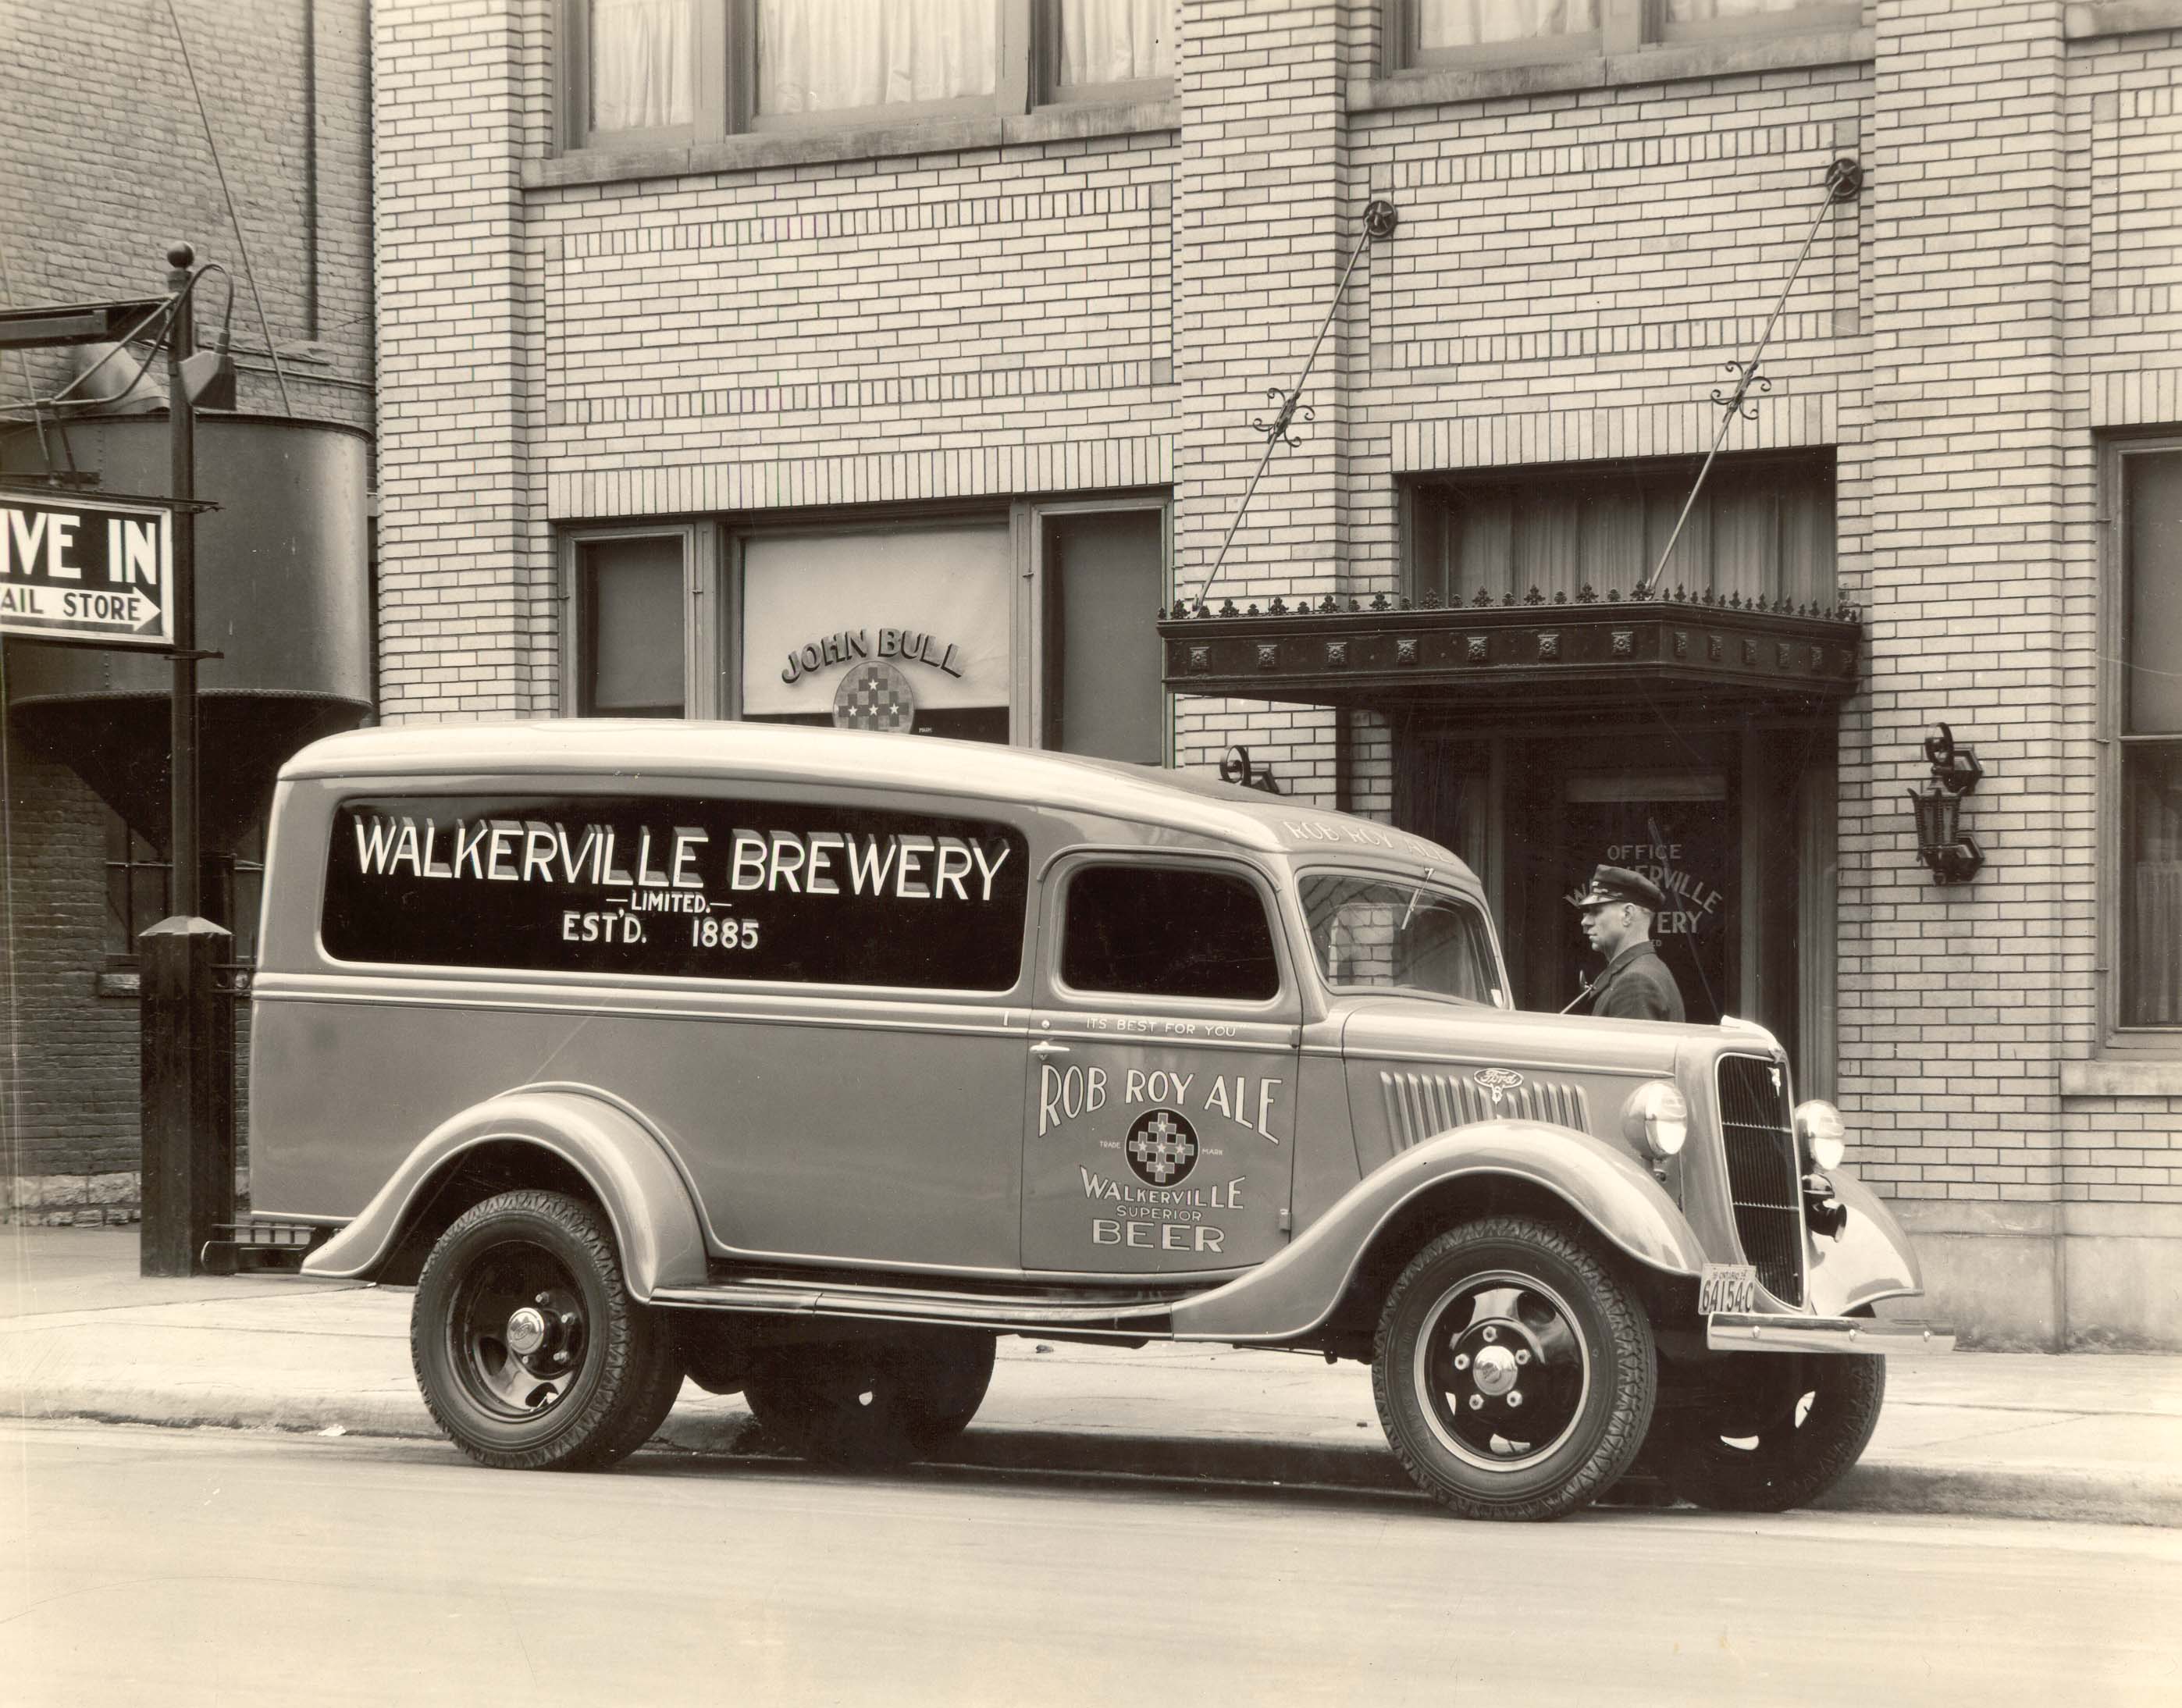 Photo%20of%20a%20Walkerville%20Brewing%20Co.%20delivery%20truck%20advertising%20the%20company%27s%20Rob%20Roy%20Ale